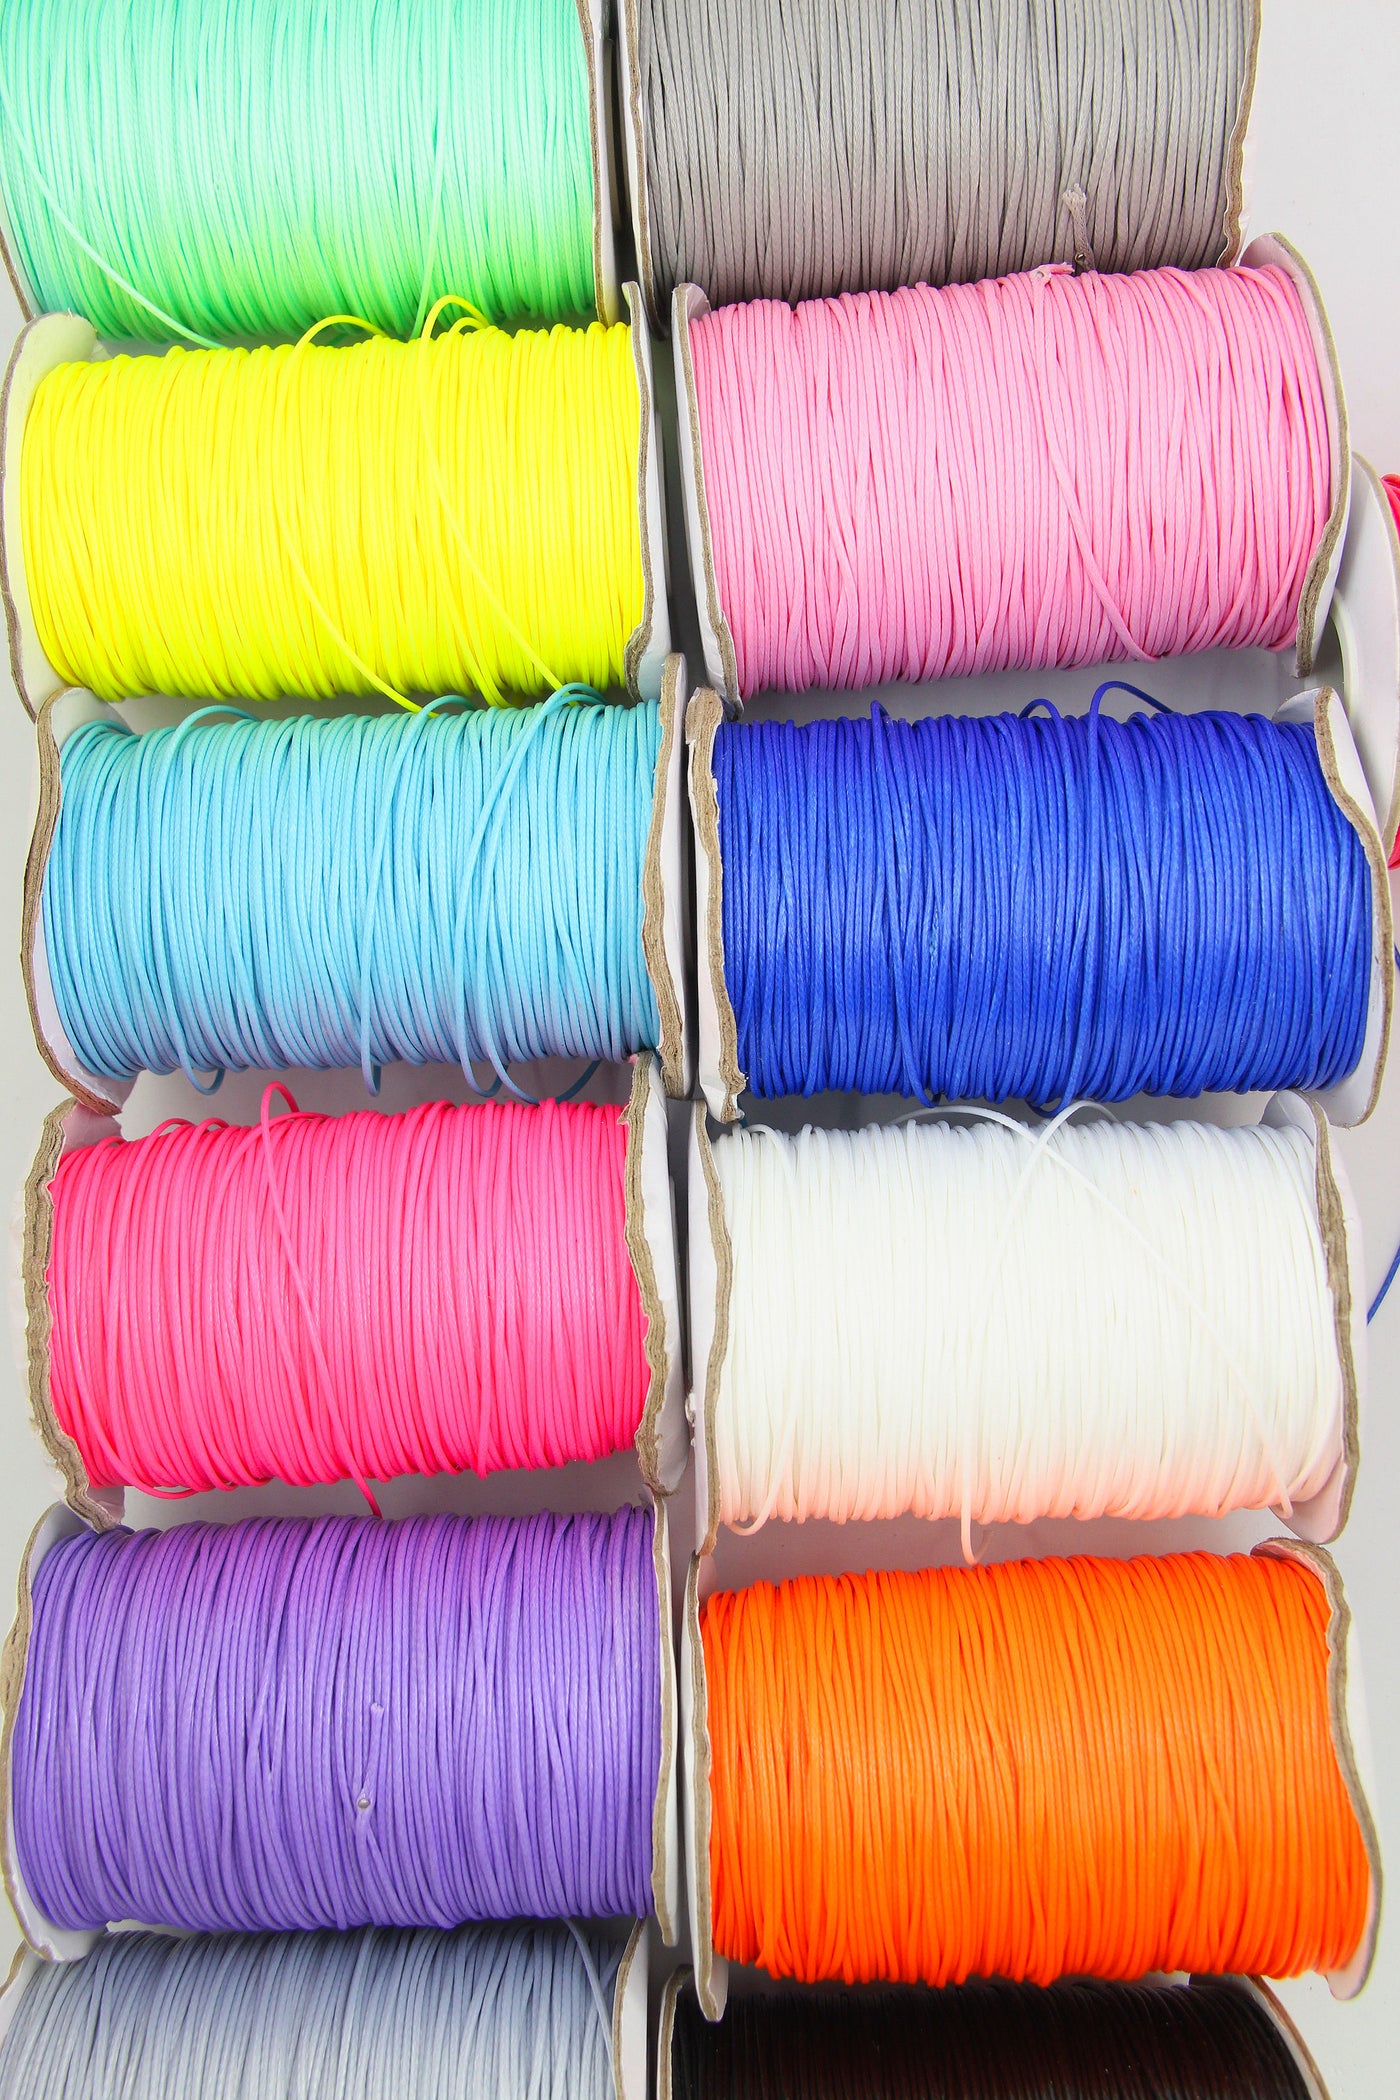 1mm Multi Color Nylon Cord WHOLE BUNCH, Braided Silky, Nylon String,knotting  Cord, Macrame Cord ,thread Rope Whole Bunch Free Shipping 